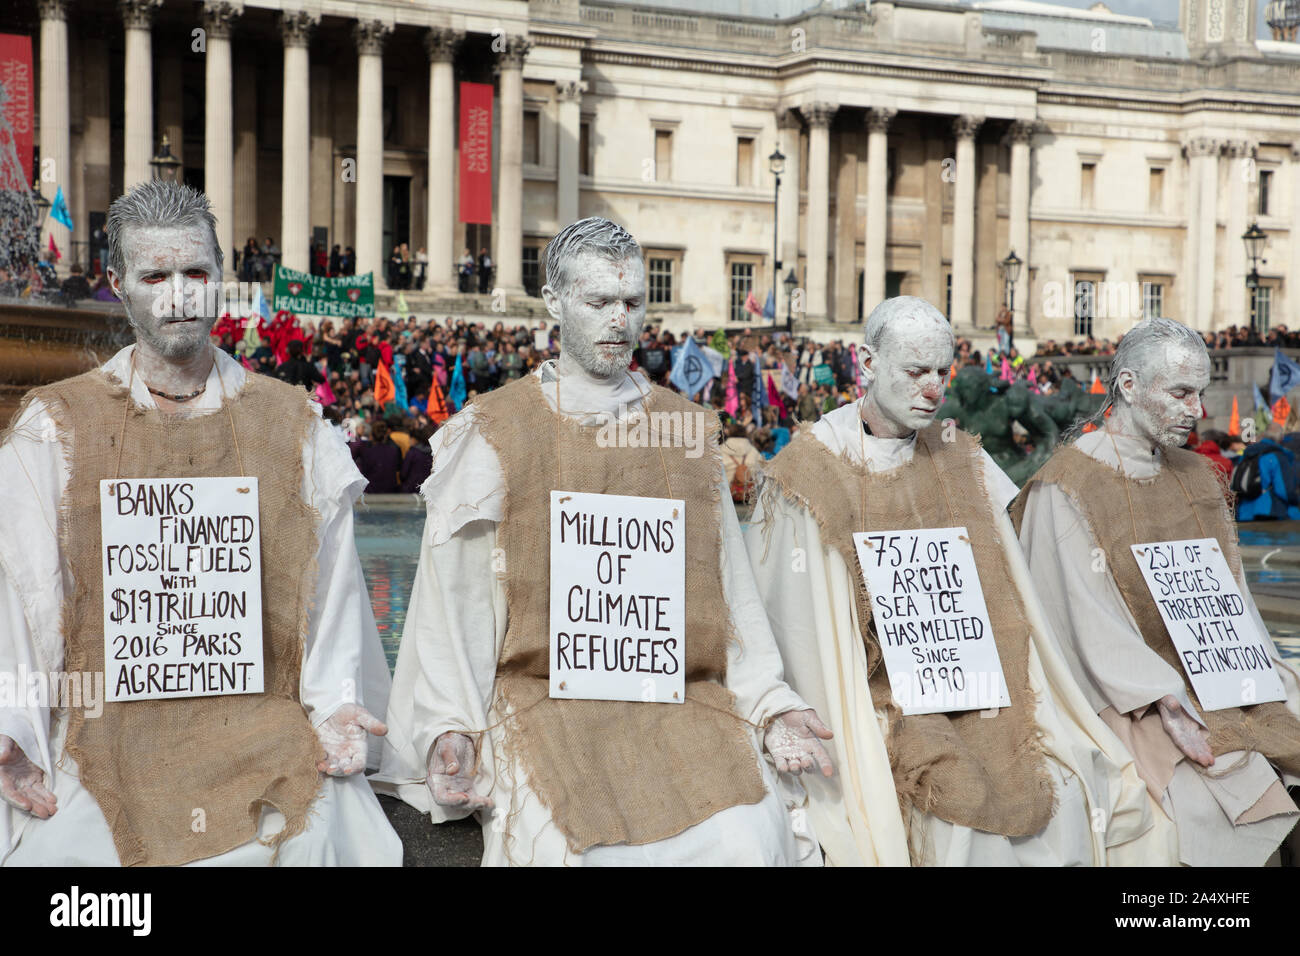 London, UK. 16th October 2019. Extinction Rebellion protesters seen on Trafalgar Square in defiance of the Section 14 of the Public Order Act 1986, issued by the police, to cease any protests within London by the climate action group. Credit: Joe Kuis / Alamy News Stock Photo